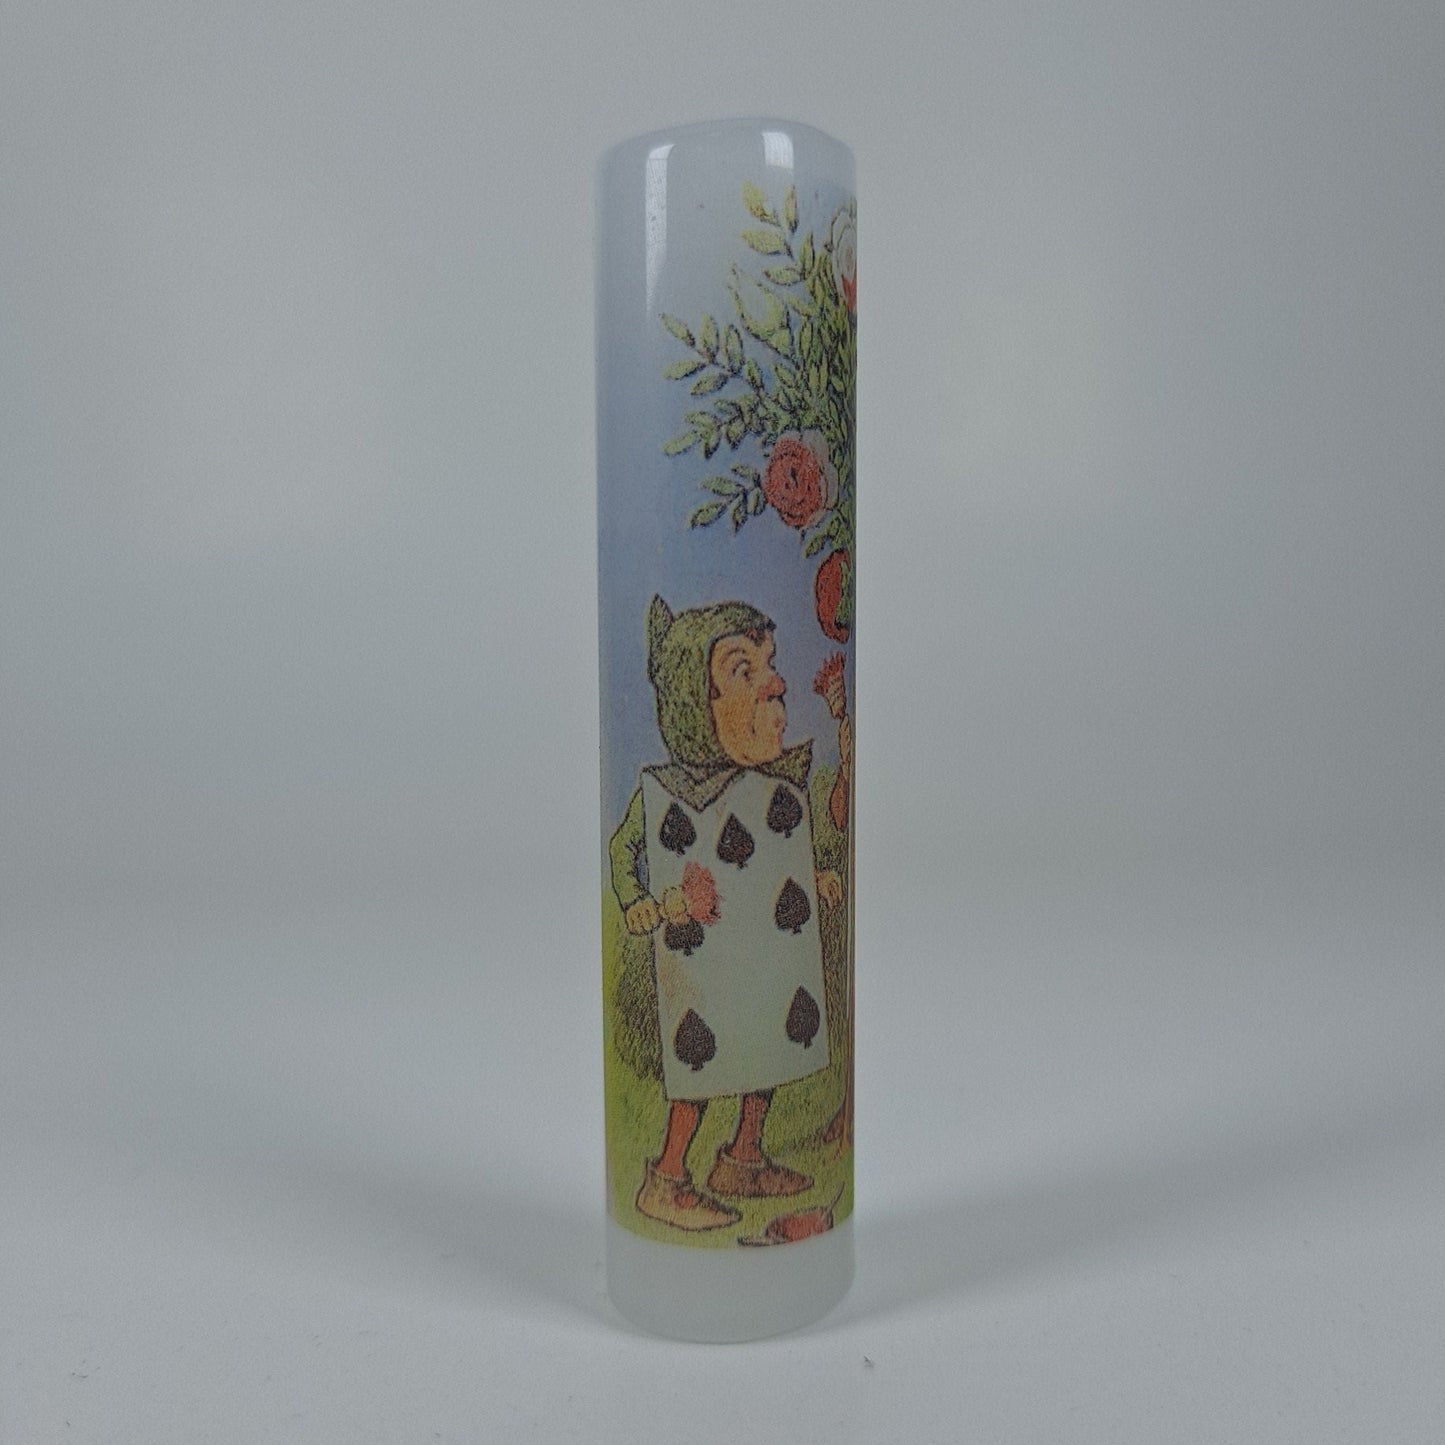 Alice's Adventure in Wonderland Glass Dread Bead Collection, Ready to Ship